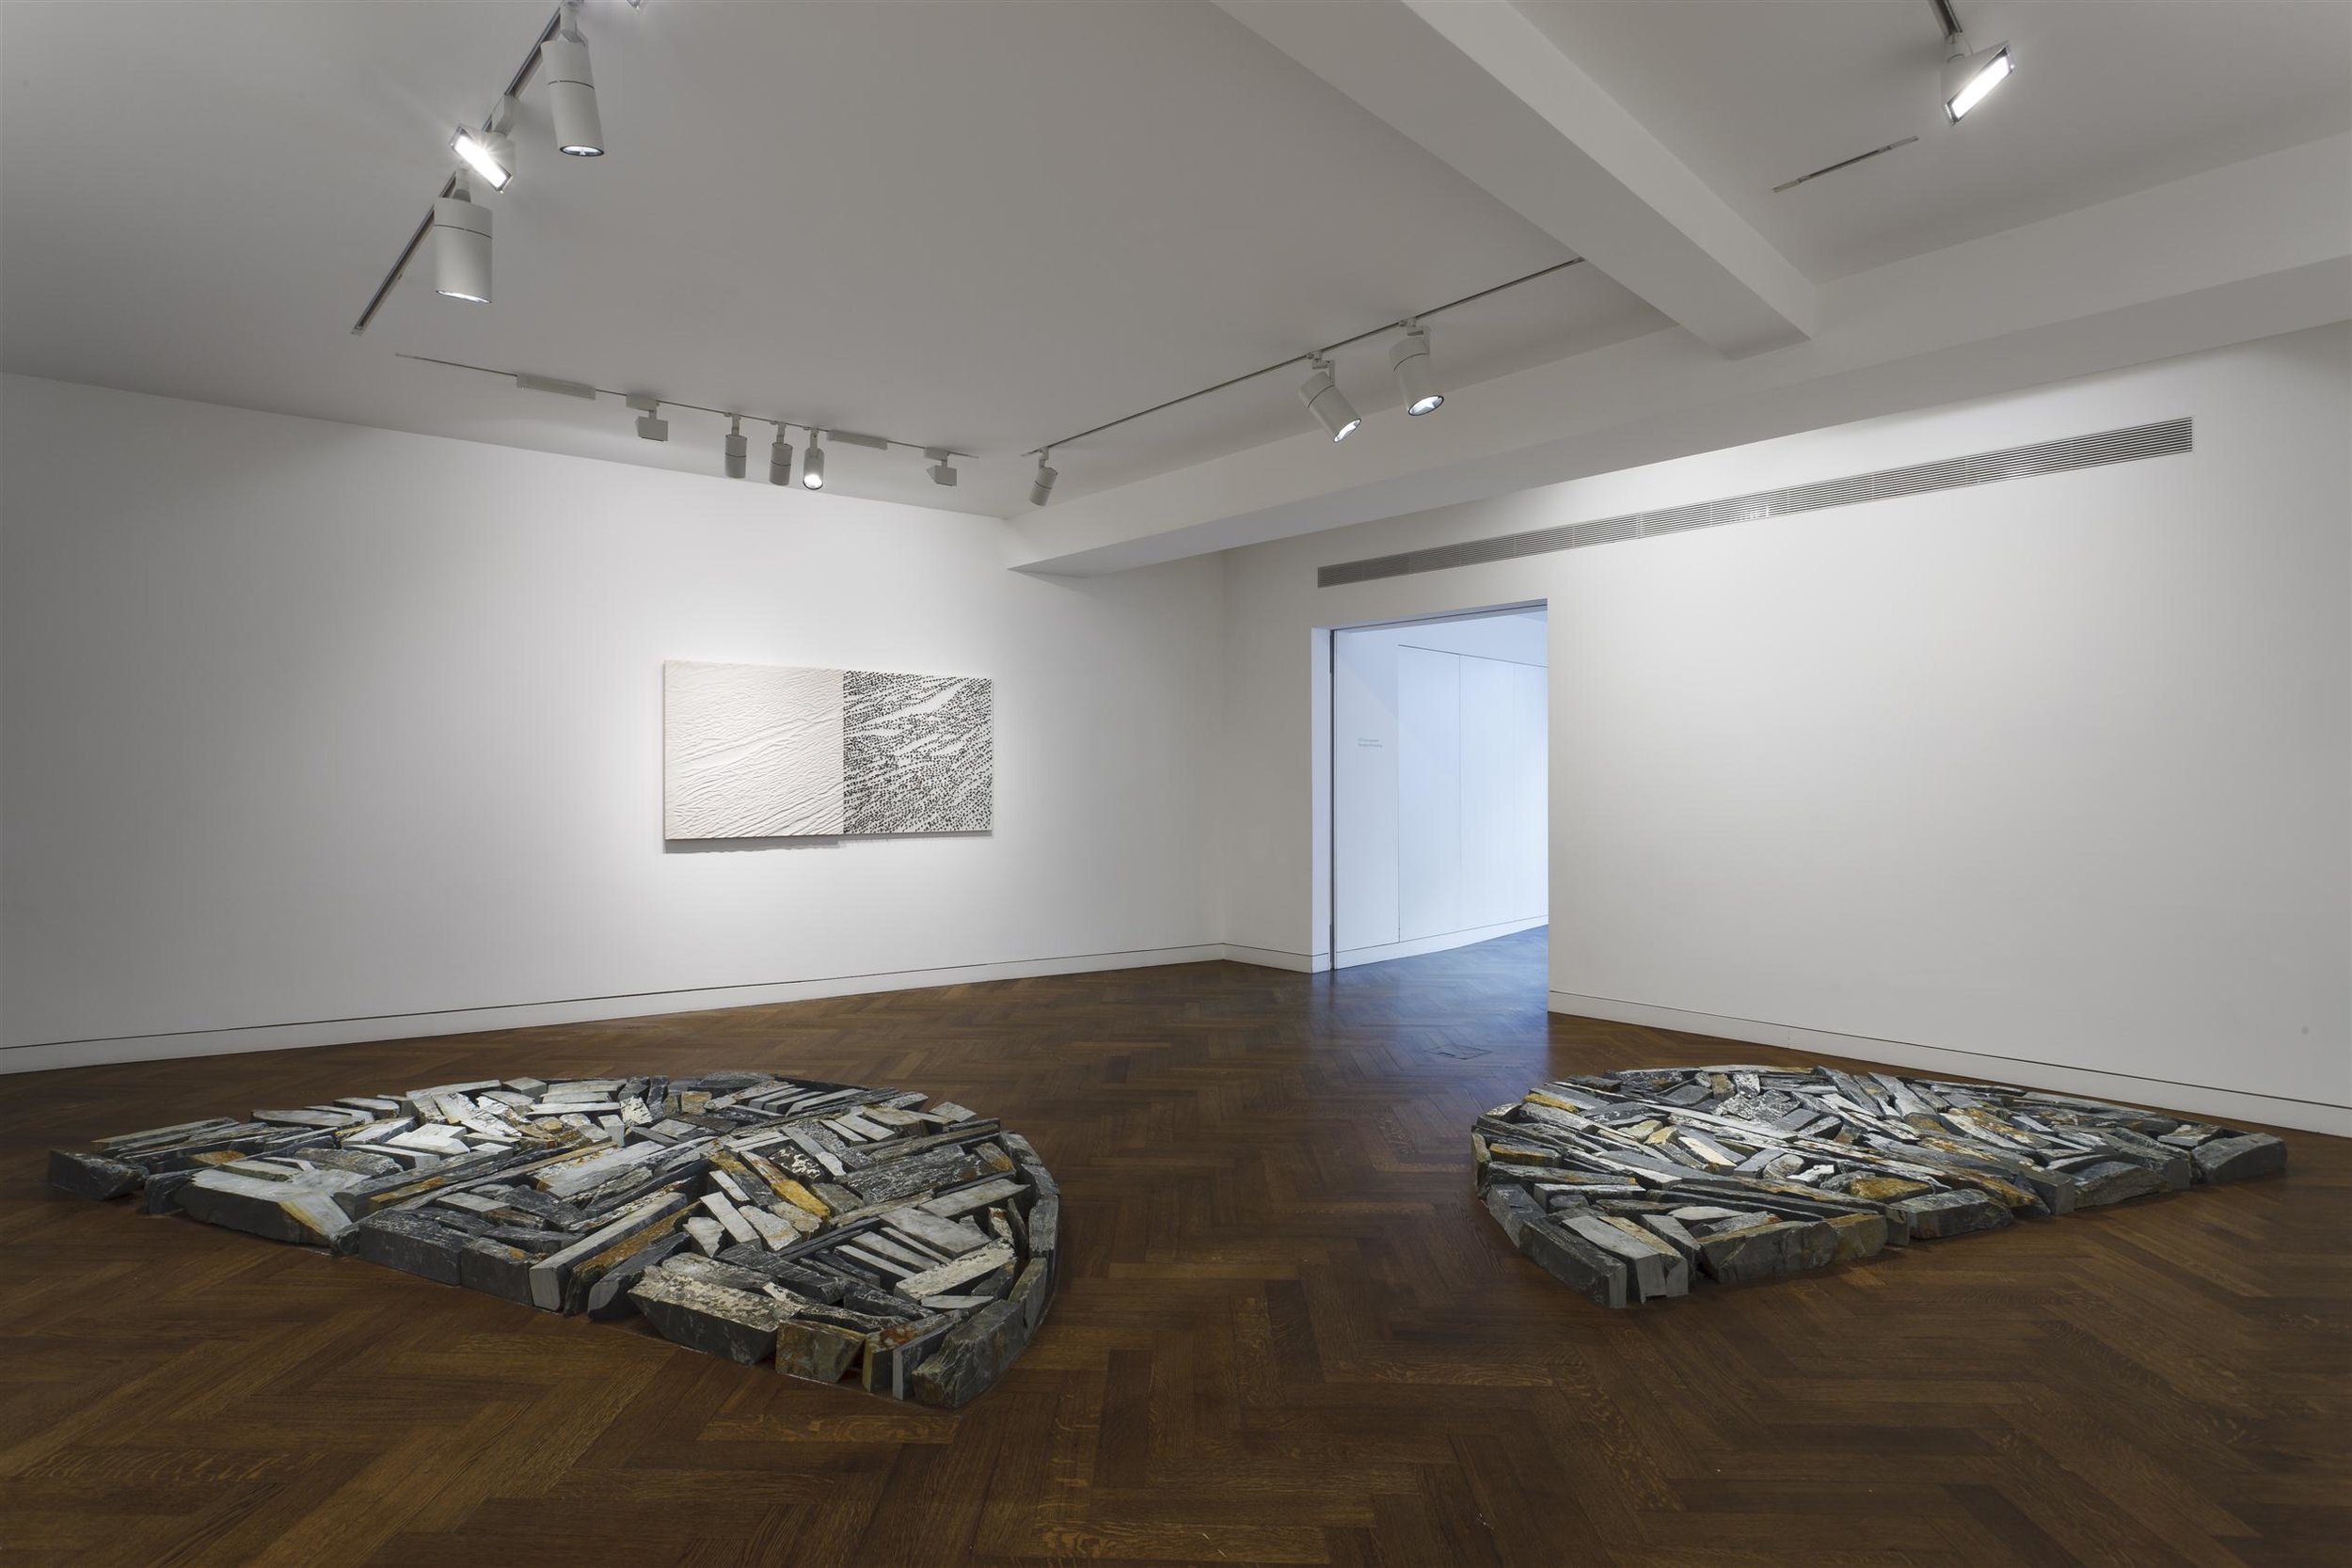  Work by Richard Long and Giuseppe Penone. Photo: Peter Mallet 